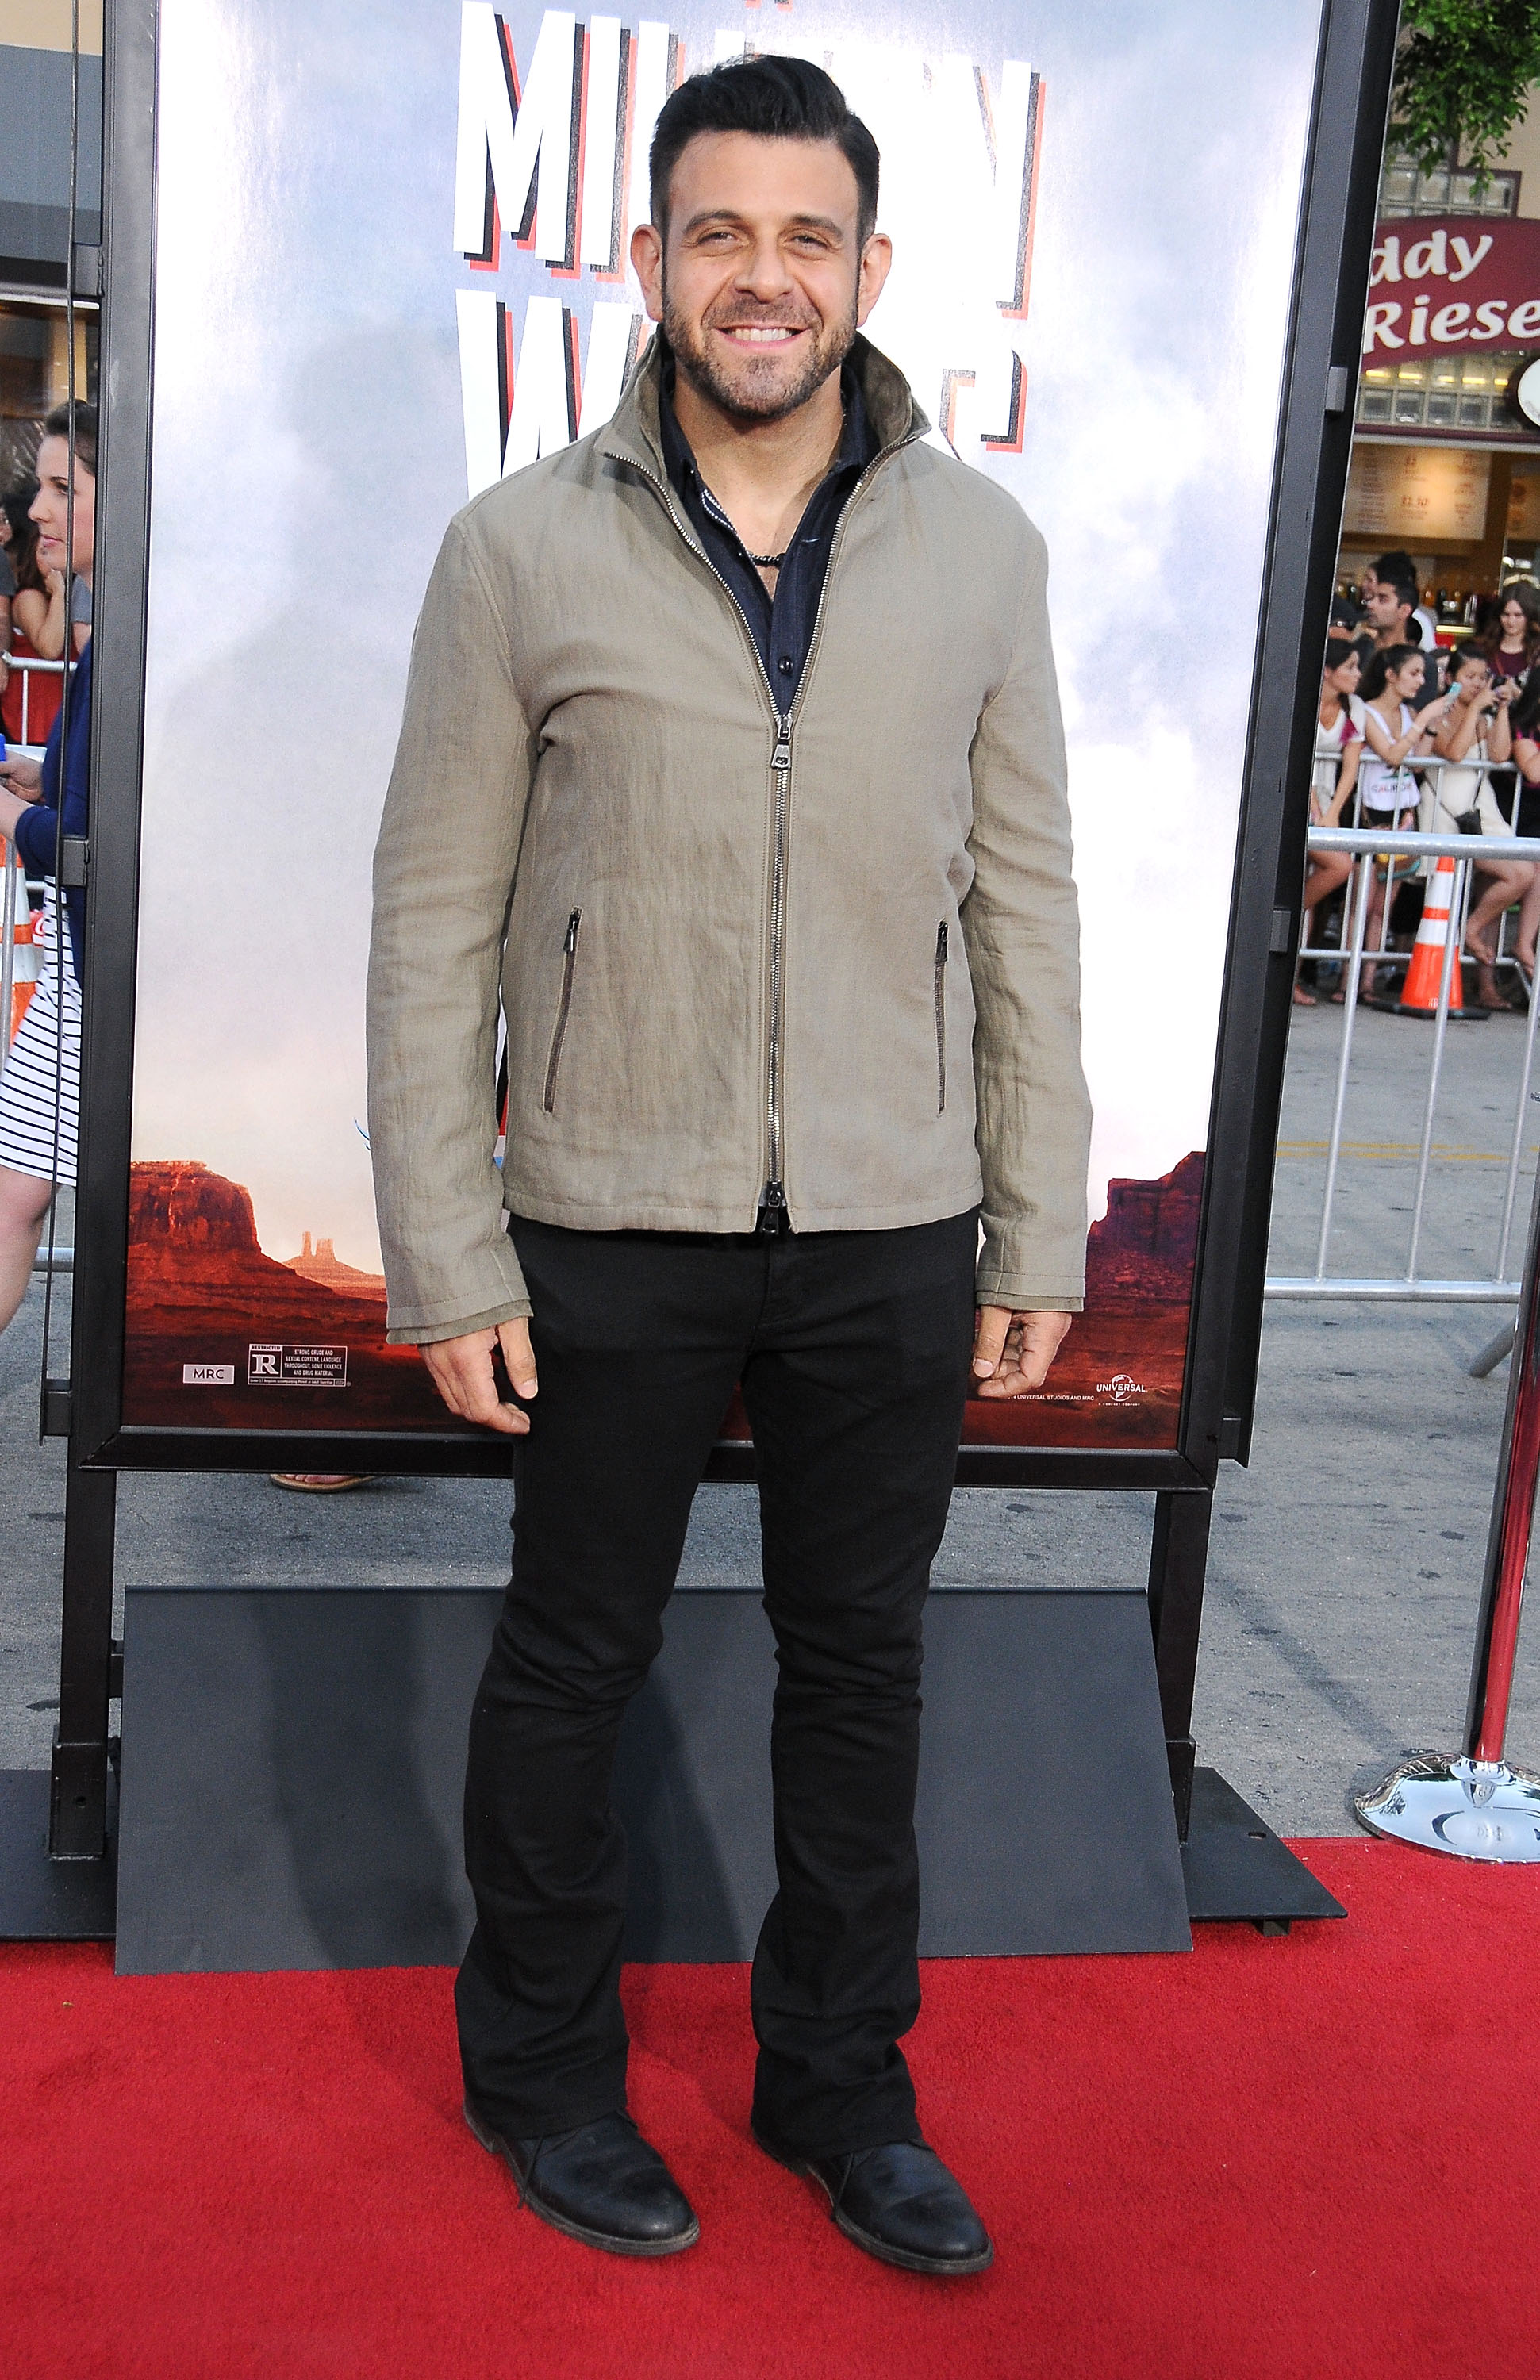 TV personality Adam Richman arrives at the Los Angeles Premiere 'A Million Ways To Die In The West' on May 15, 2014 at Regency Village Theatre in Westwood, California.  (Photo by Barry King/FilmMagic) (Barry King&mdash;FilmMagic)